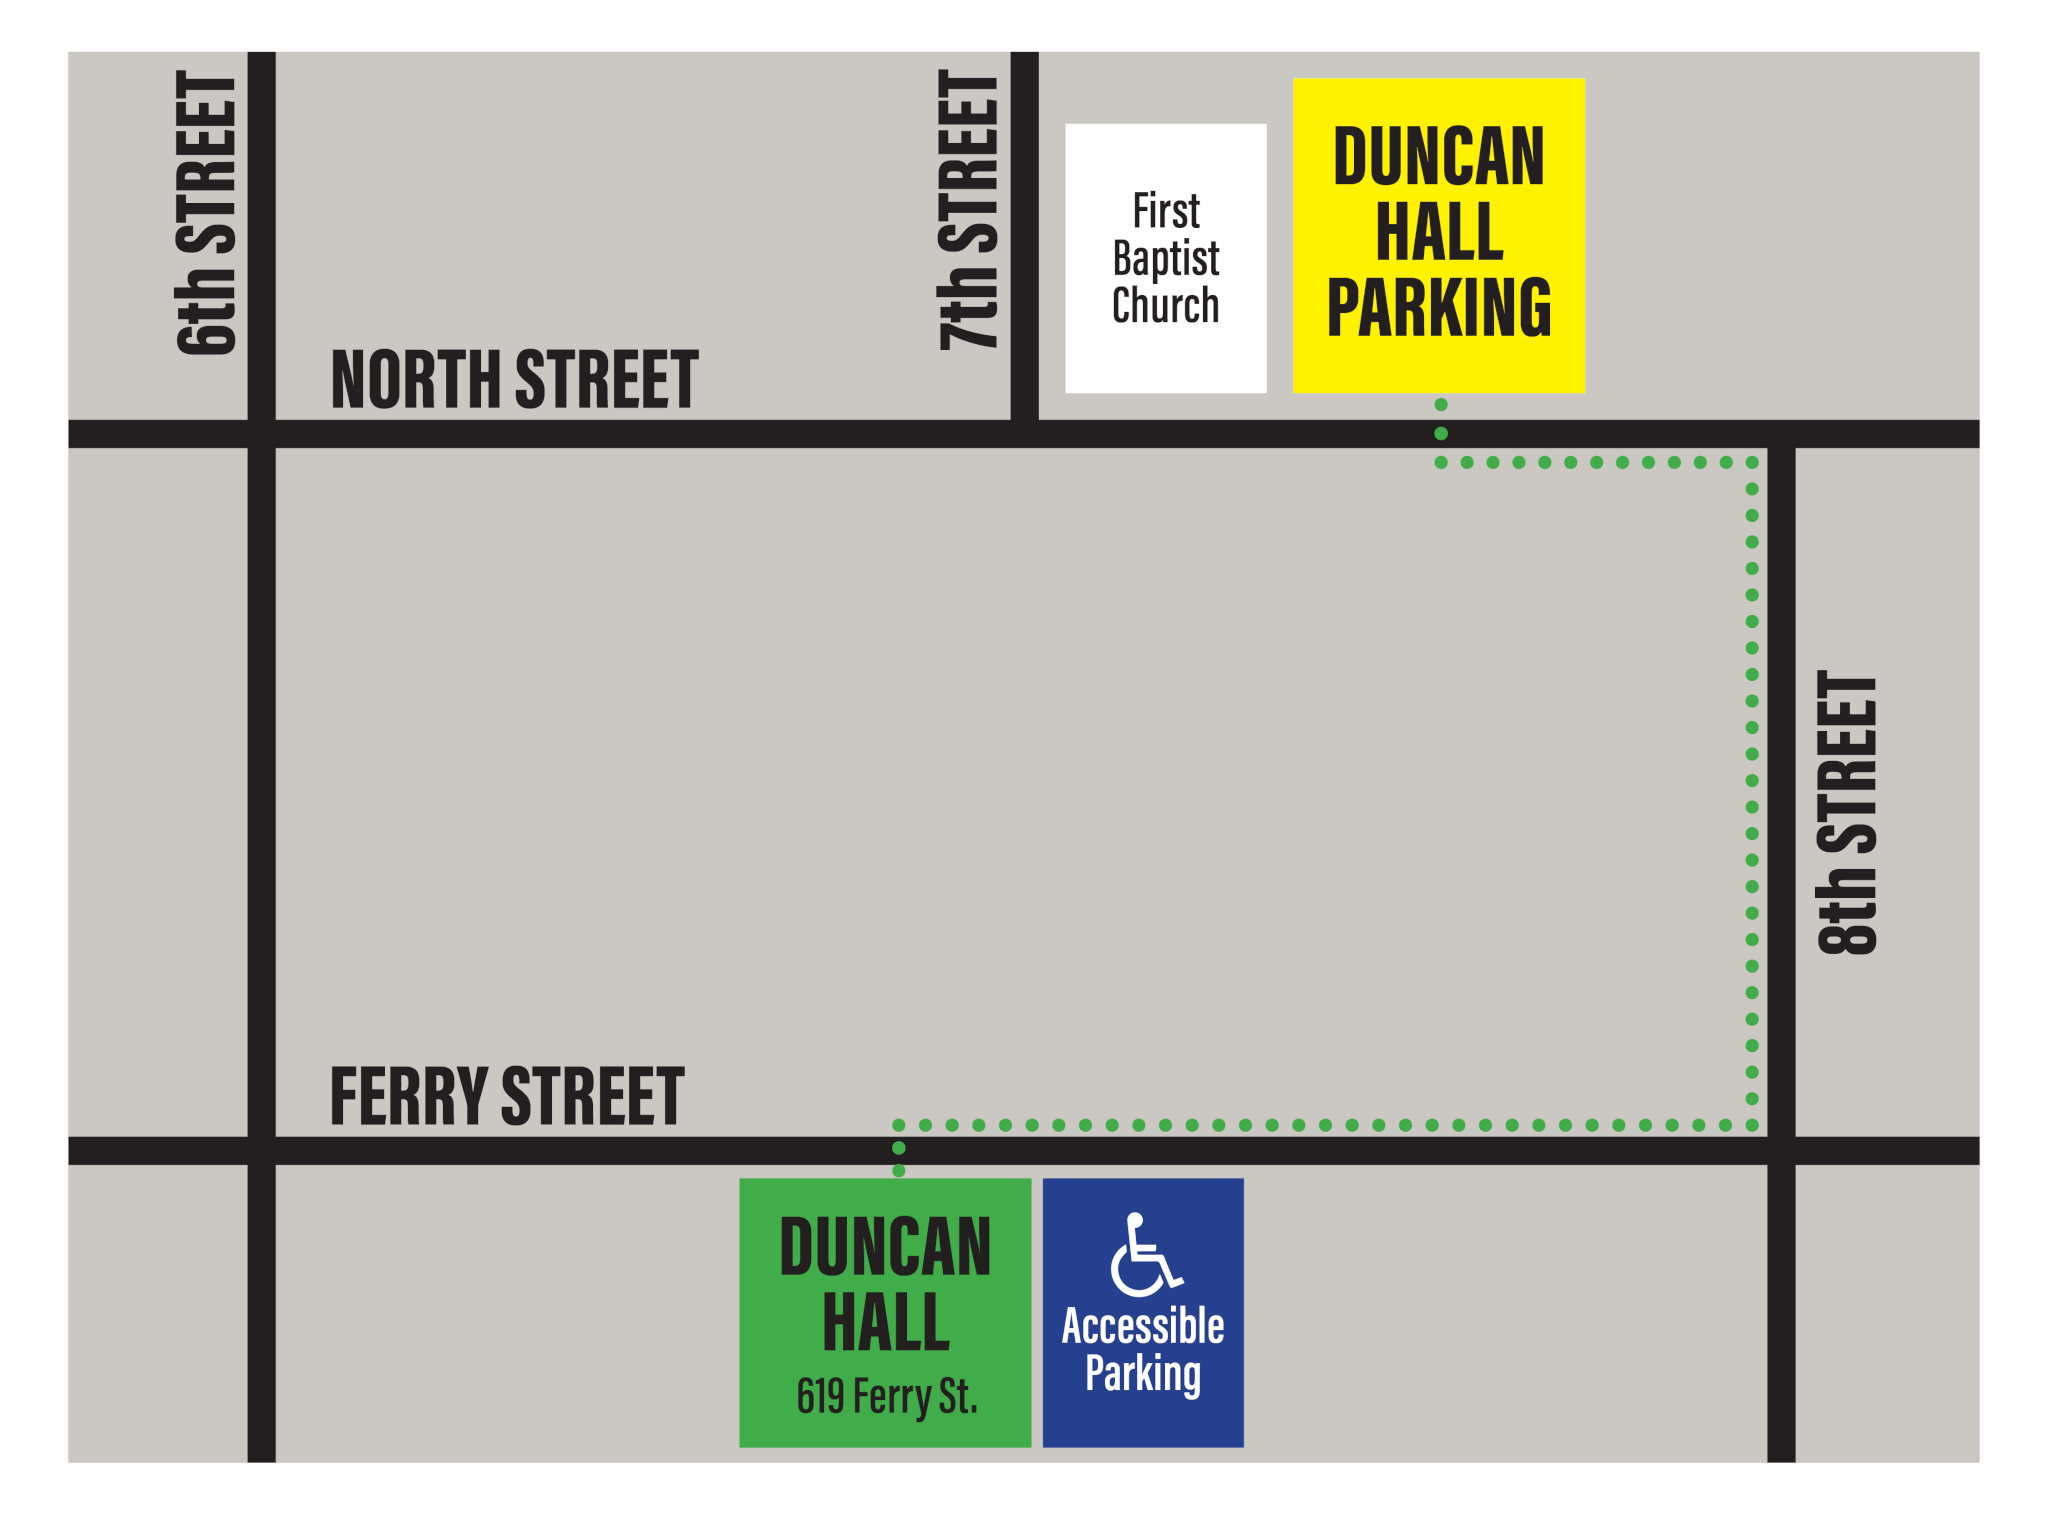 Map showing Duncan Hall with accessible parking lot on the east side of the the building off Ferry Street. Designated parking is also shown 1 block away on North Street next to First Baptist Church.